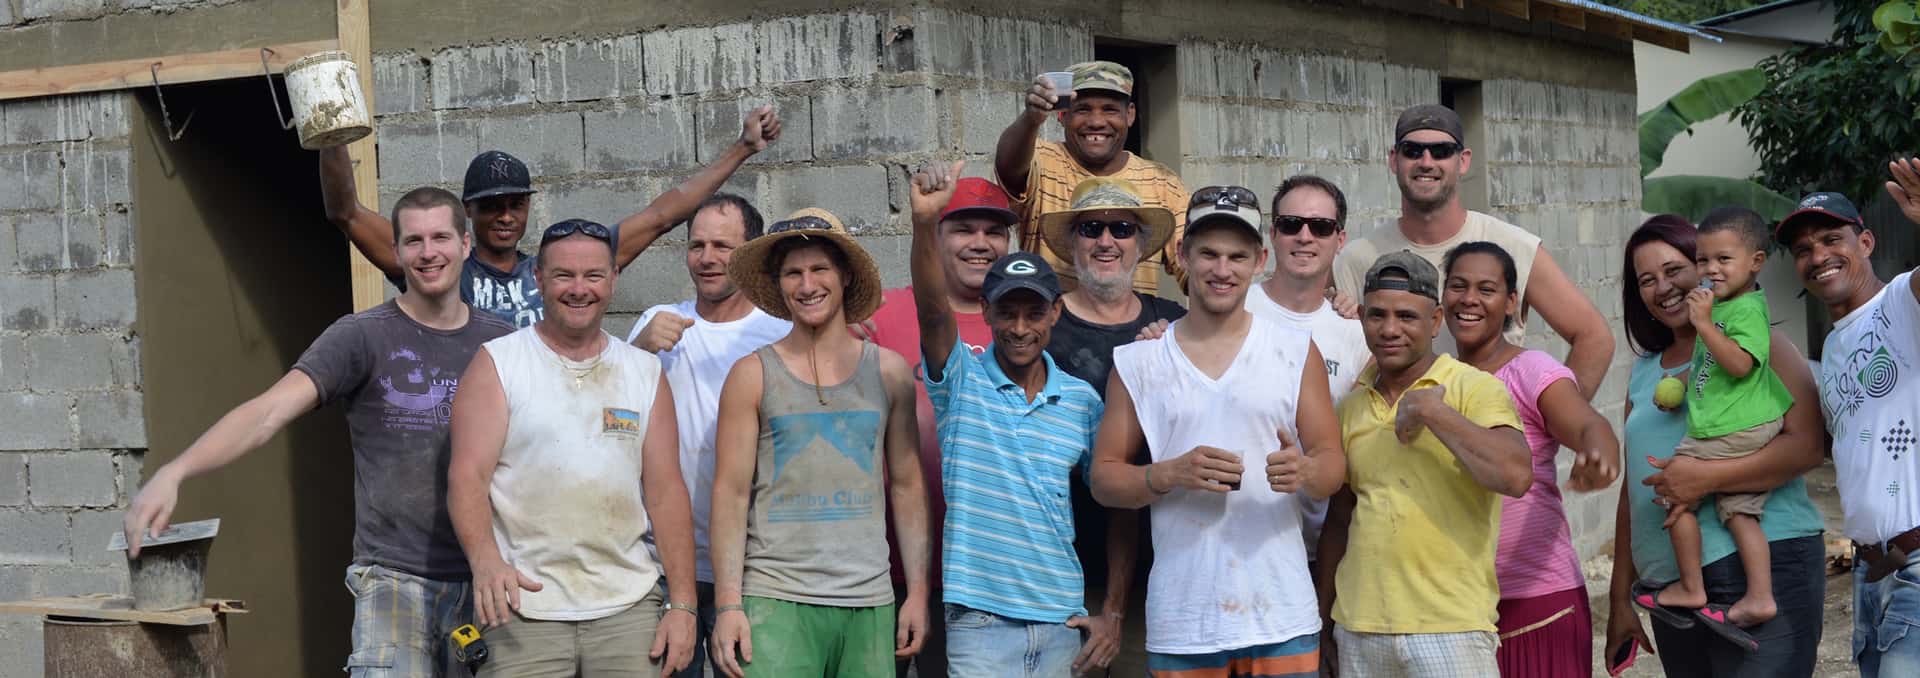 Made to Last team in Dominican Republic helping to build homes for families in need.